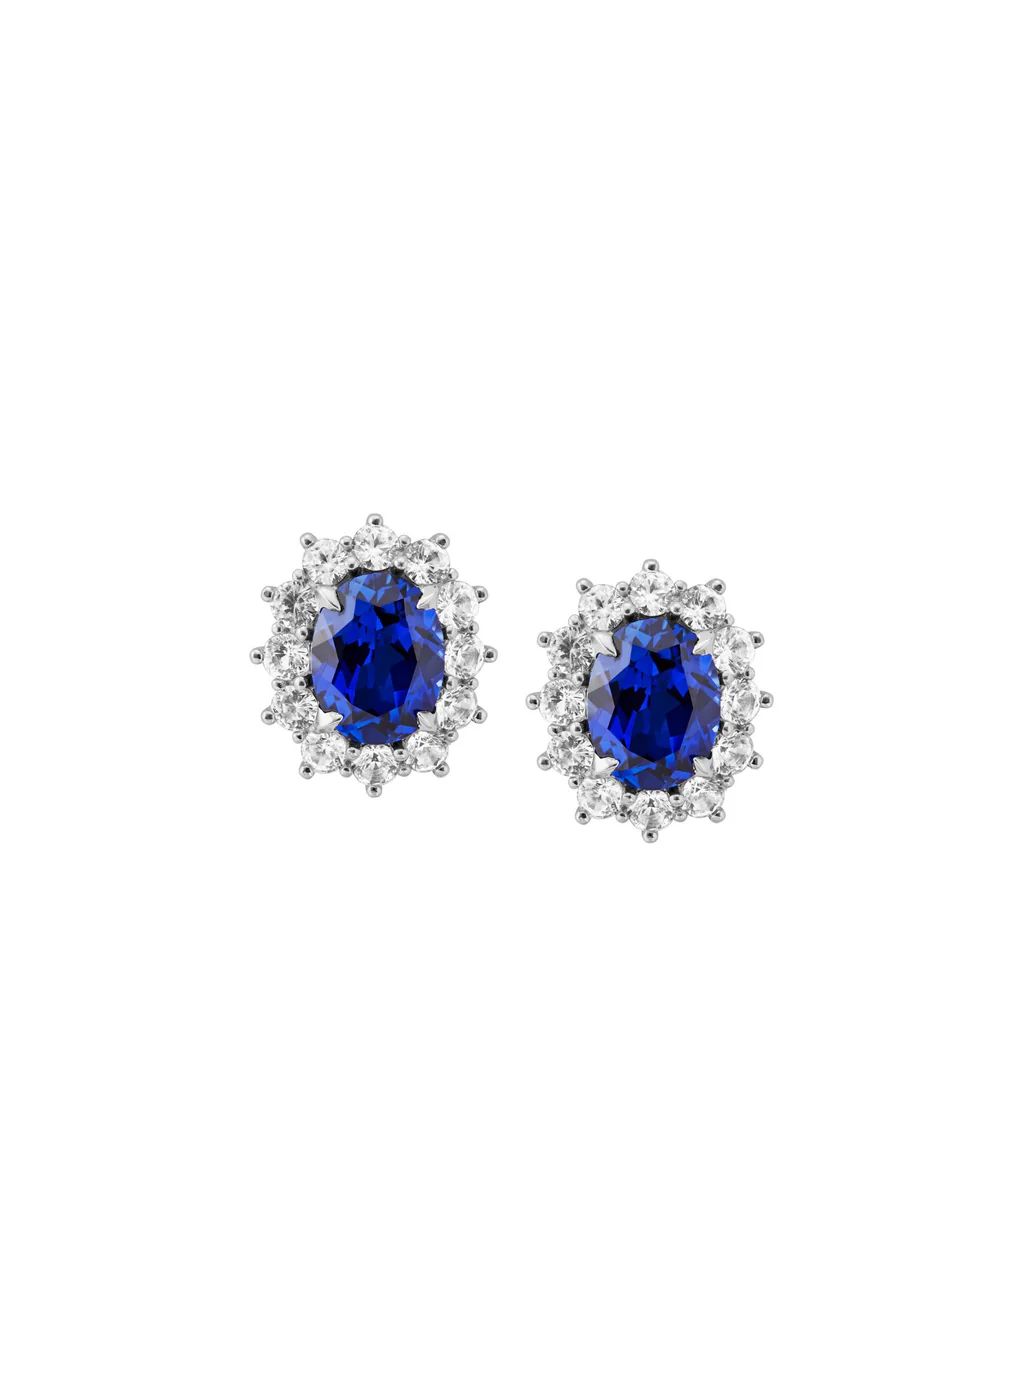 SPENCER, LAB-GROWN BLUE AND WHITE SAPPHIRE STUDS | Dorsey